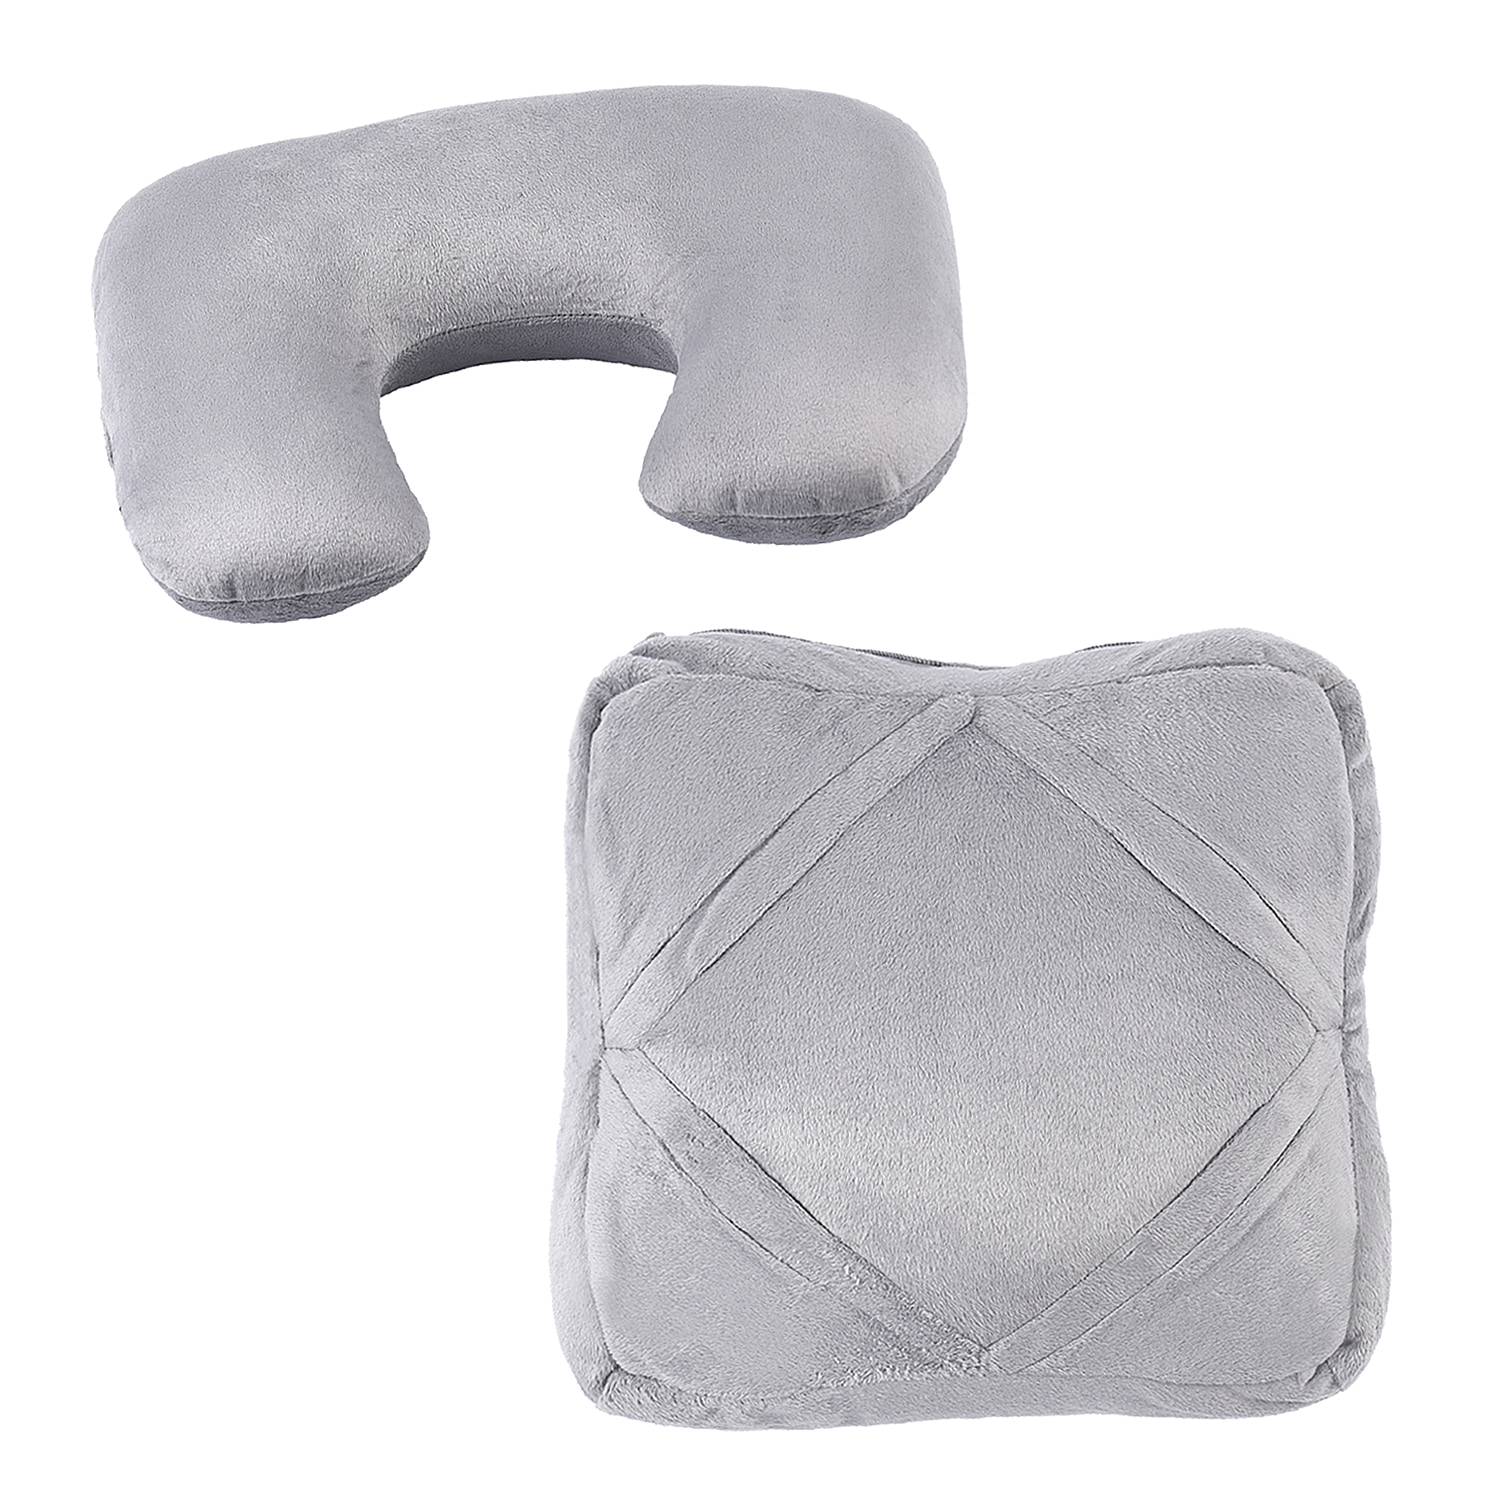 2-in-Multipurpose-Supersoft-Ipad-Holder-and-Shaped-Travel-Pillow-for-H